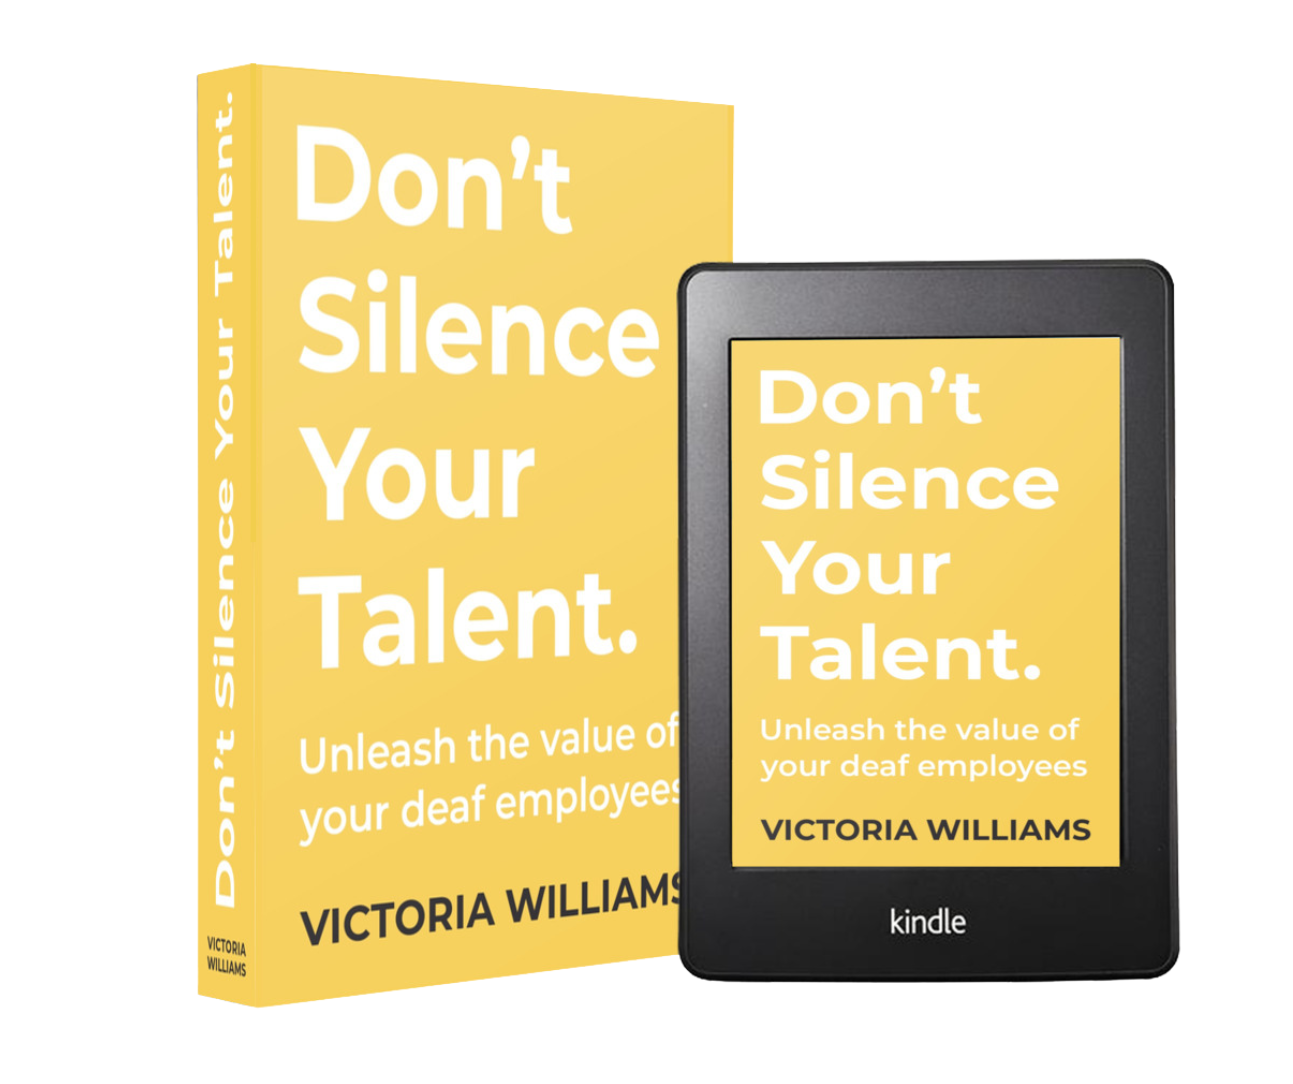 Don't Silence Your Talent